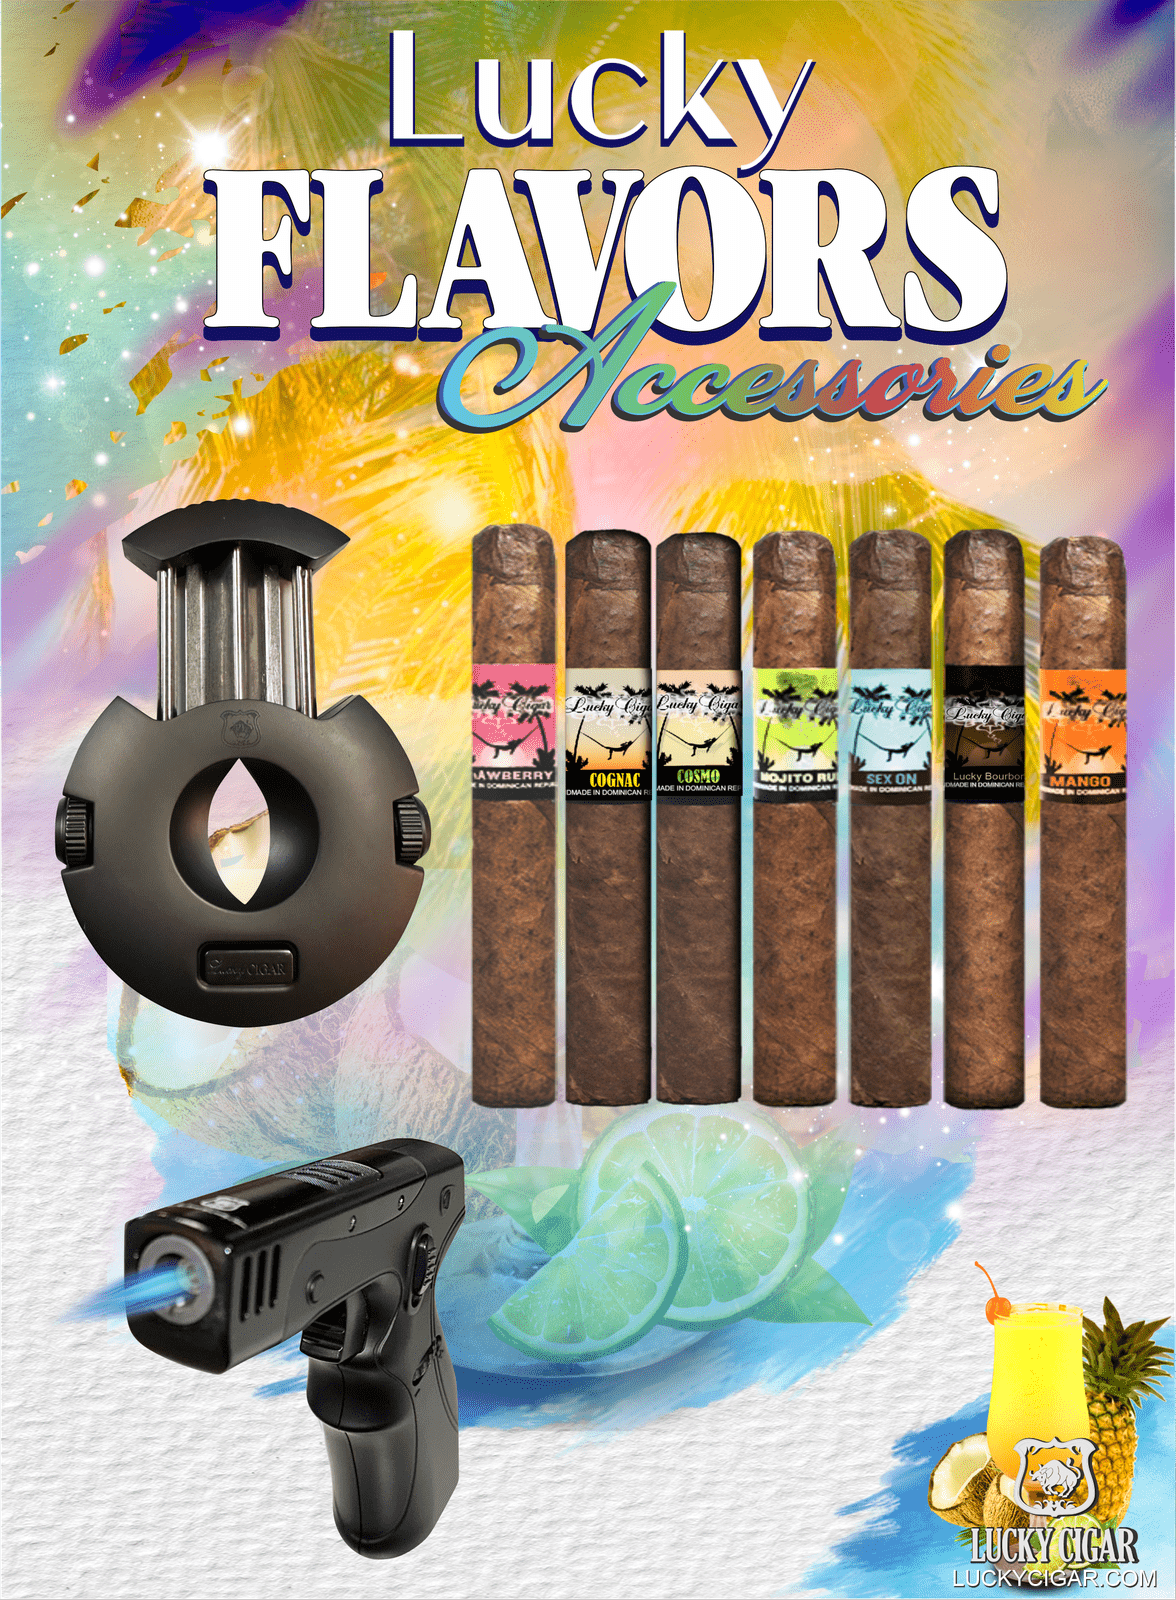 Flavored Cigars: Lucky Flavors 7 Cigar Set with Gun Torch and Cutter 